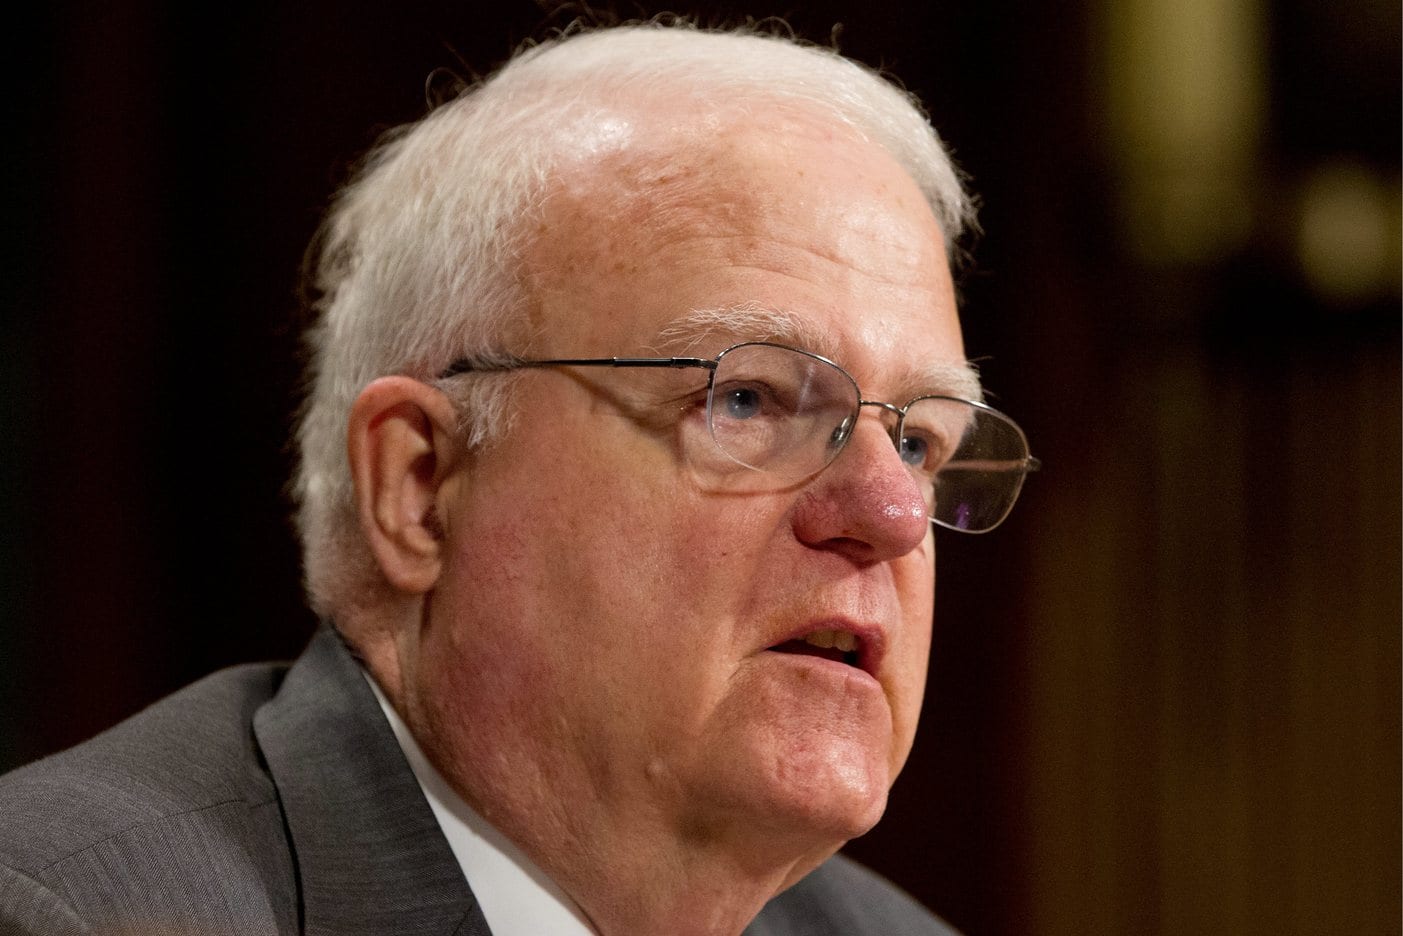 Wisconsin Congressional Representative James Sensenbrenner played a major role in passing the bill, washingtontimes.com